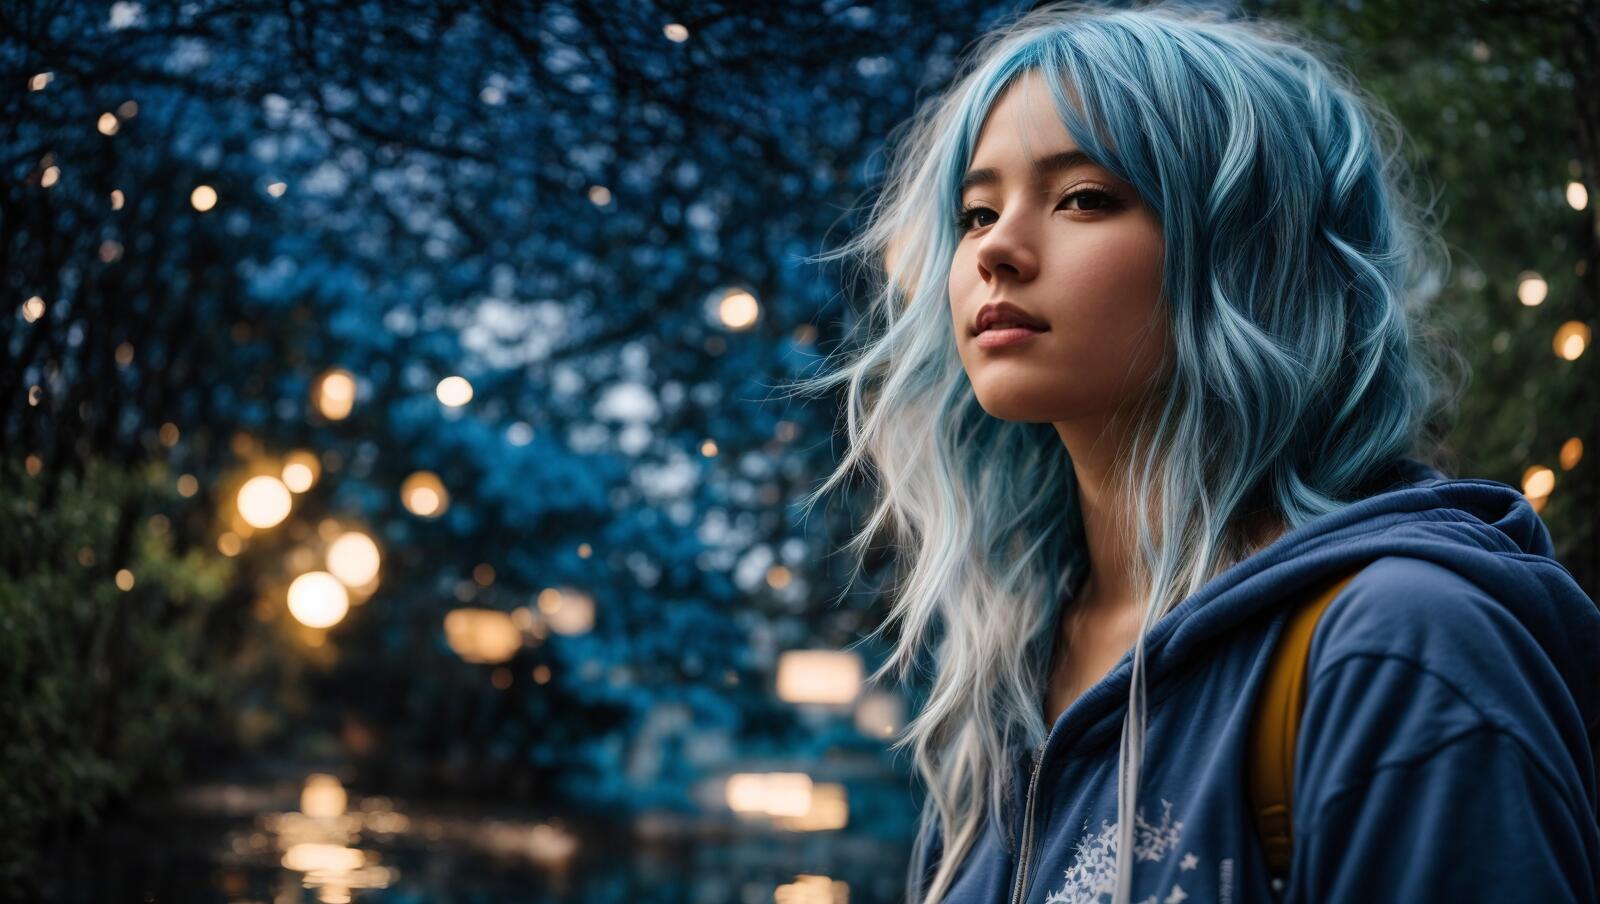 Free photo Asian girl with blue hair and makeup stares intently at something in the background